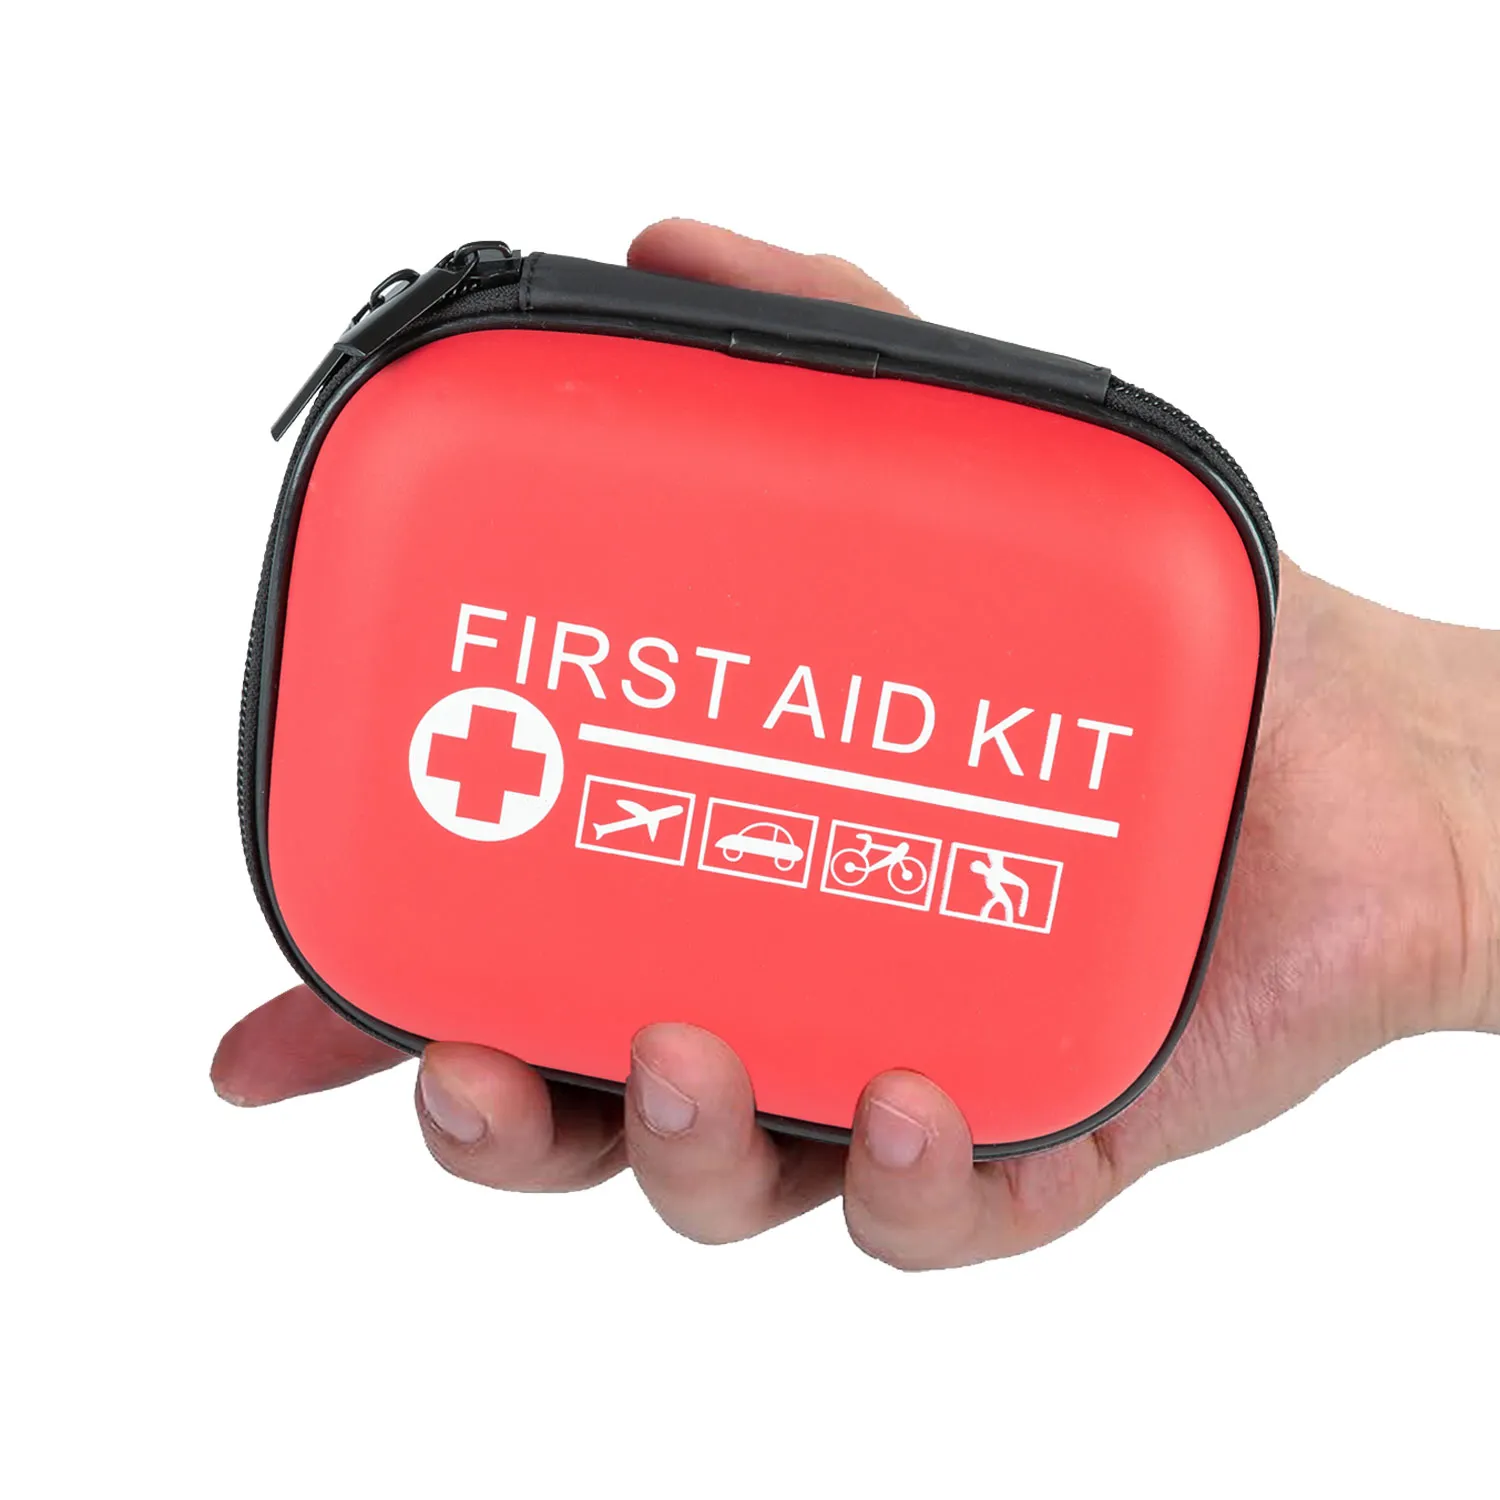 How to choose a custom printing process for first aid kit？